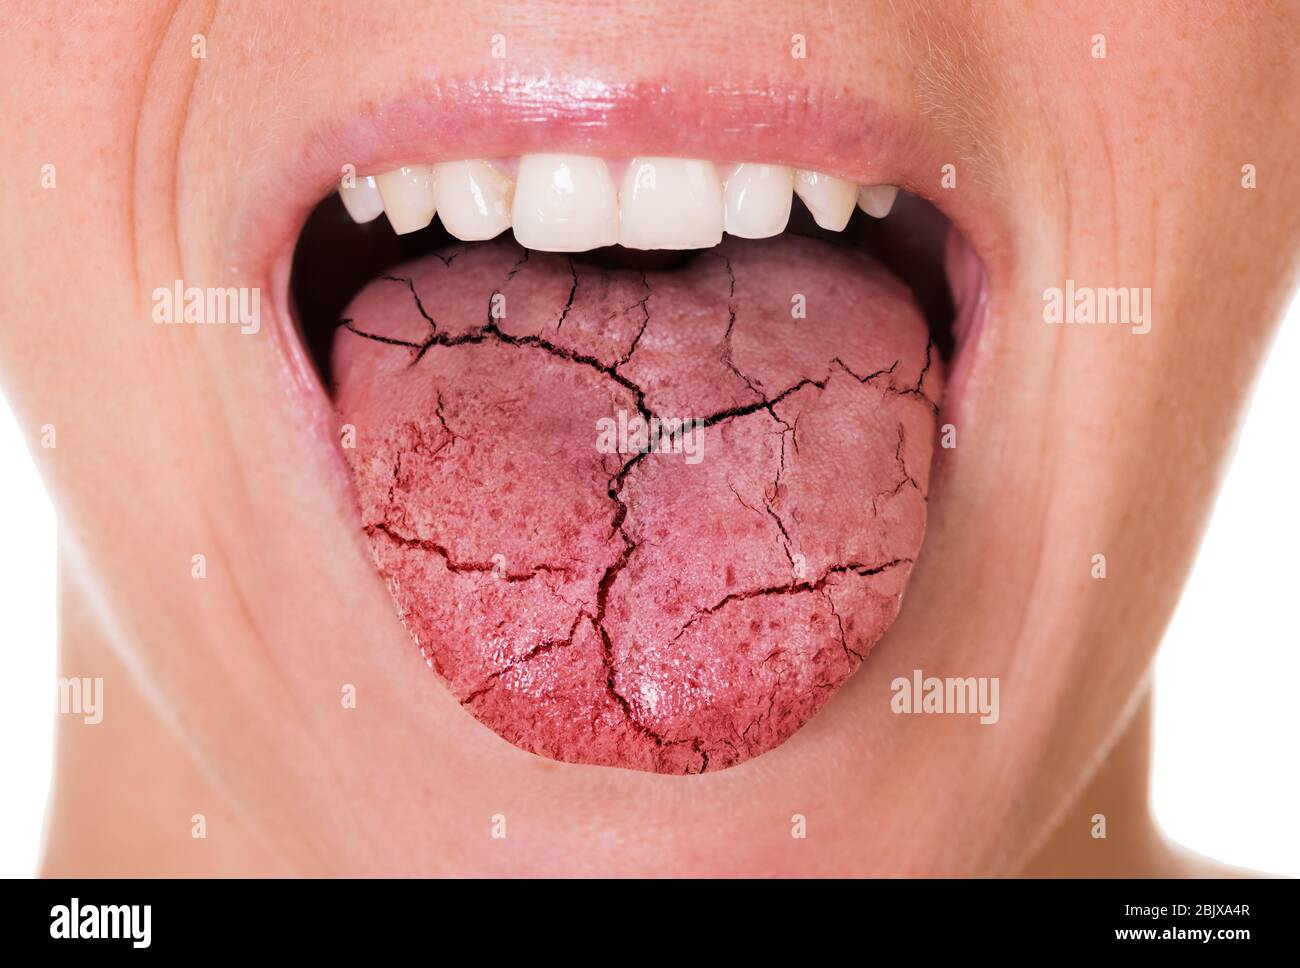 Woman Mouth And Broken Tongue With Cracks Stock Photo